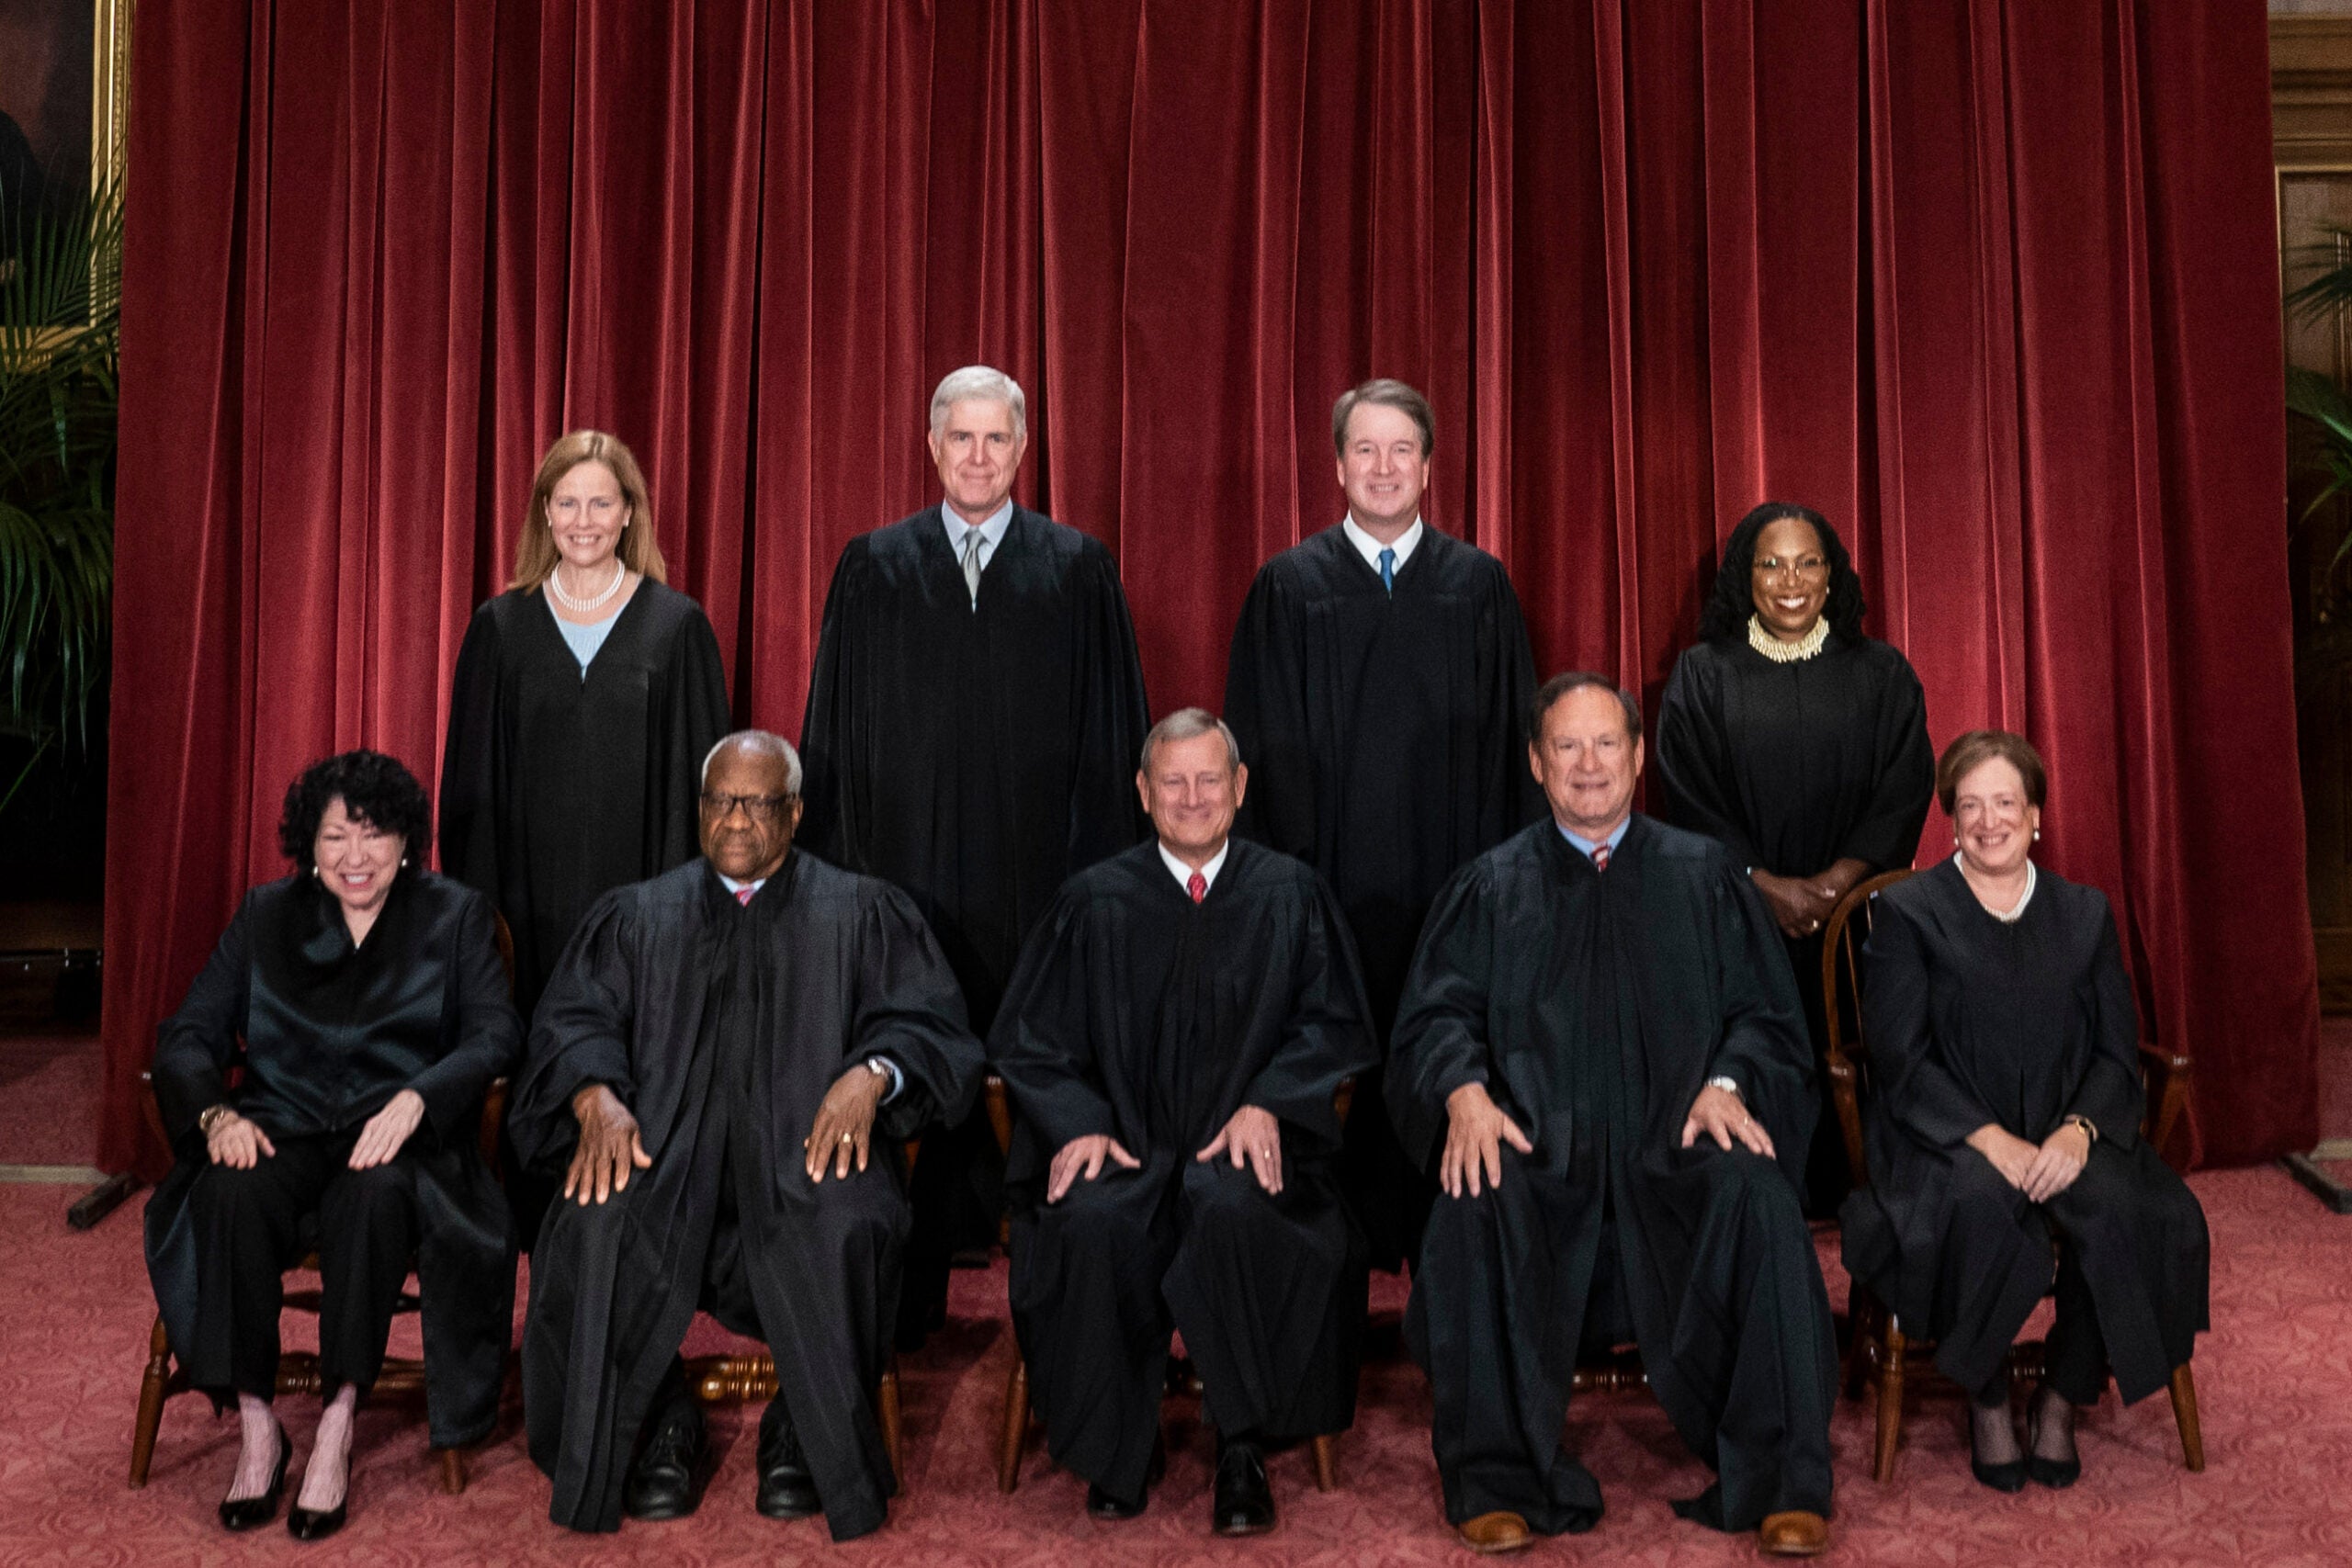 The justices of the Supreme Court in Washington, D.C.